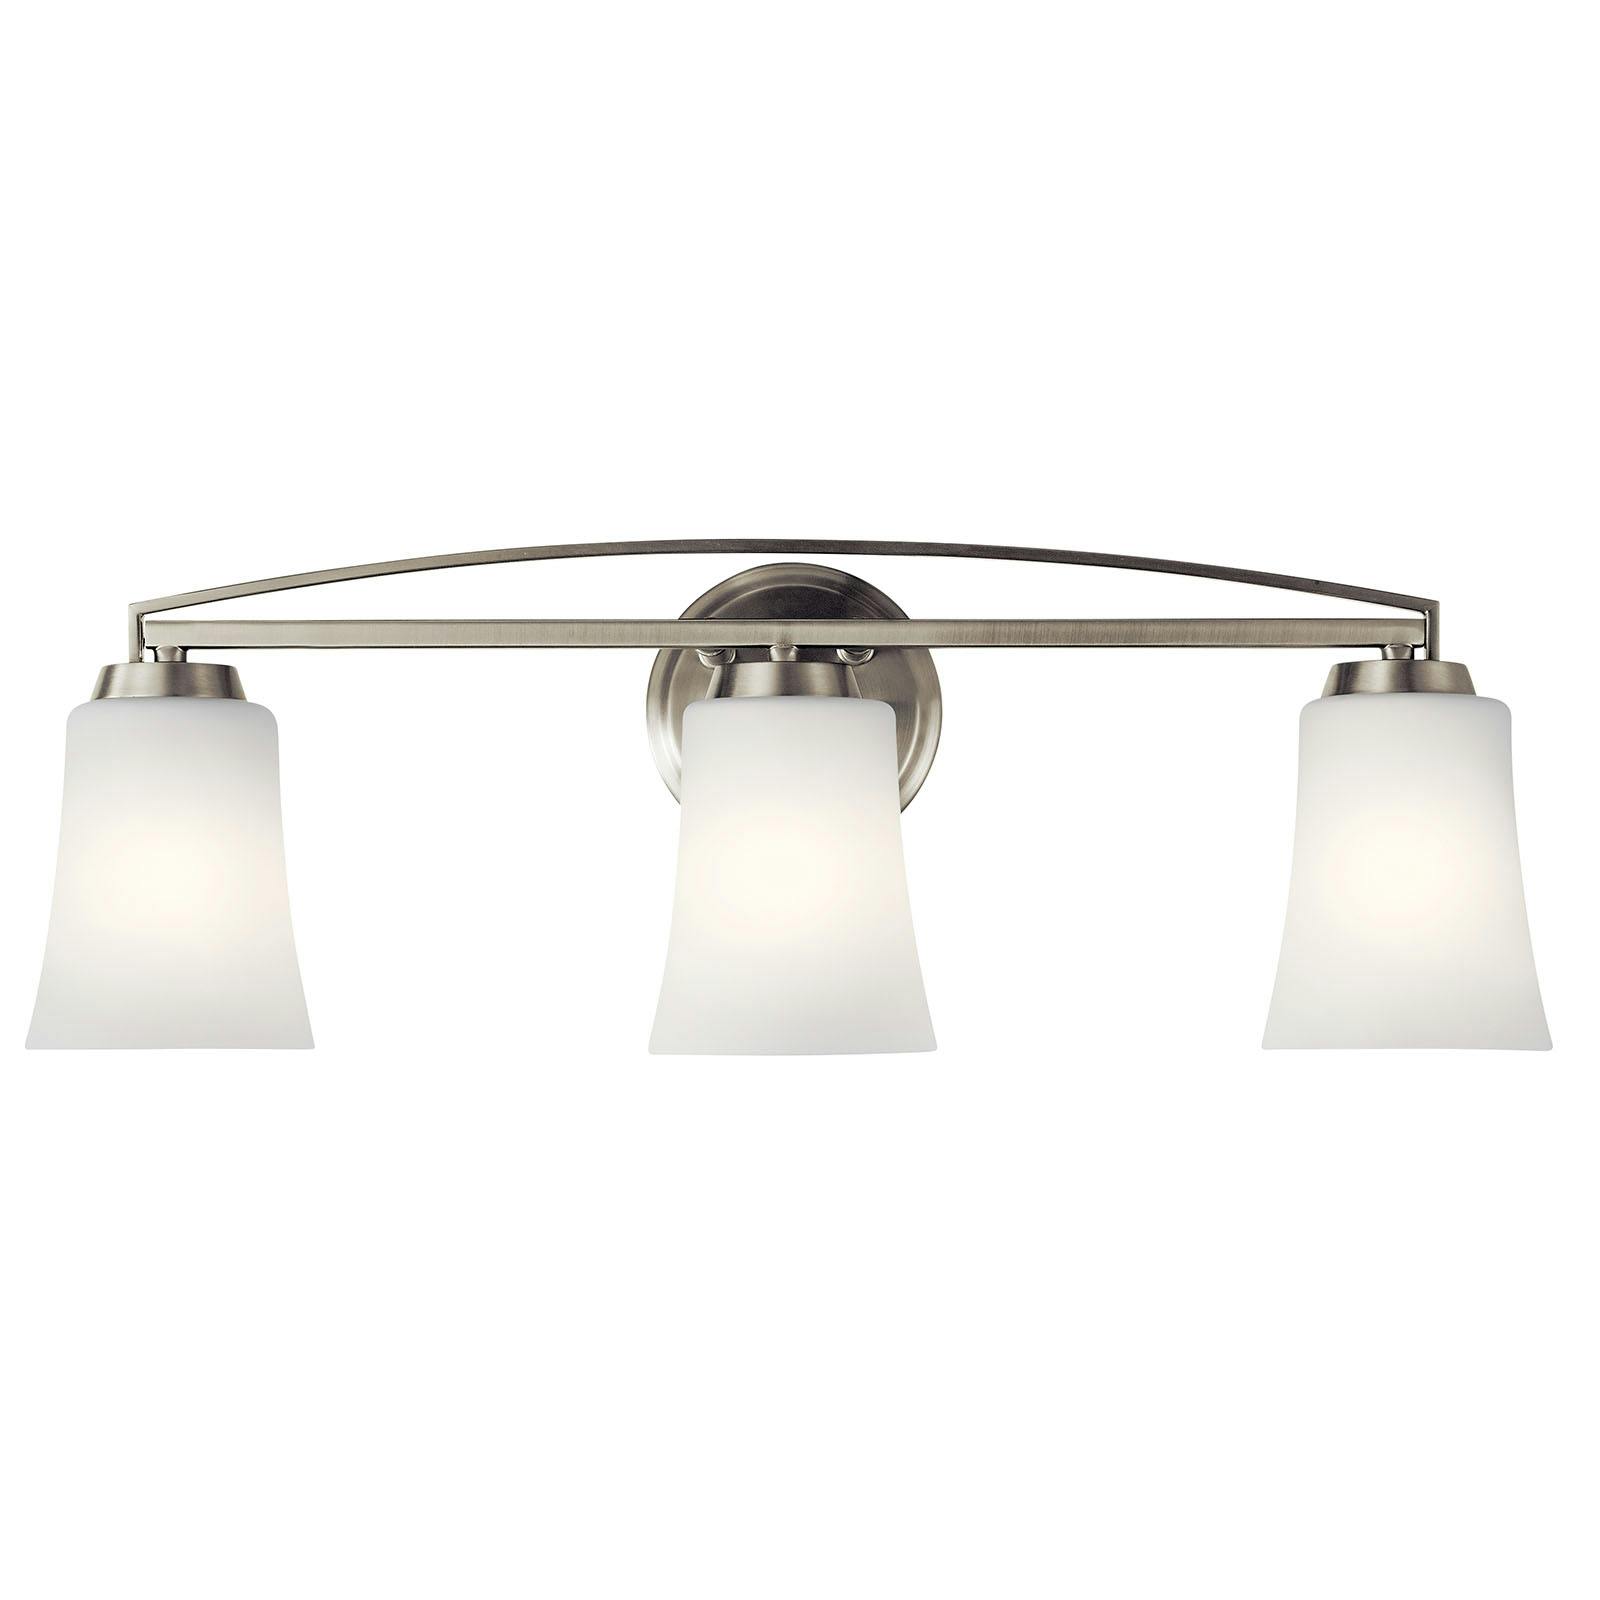 The Tao 3 Light Vanity Light Brushed Nickel facing down on a white background